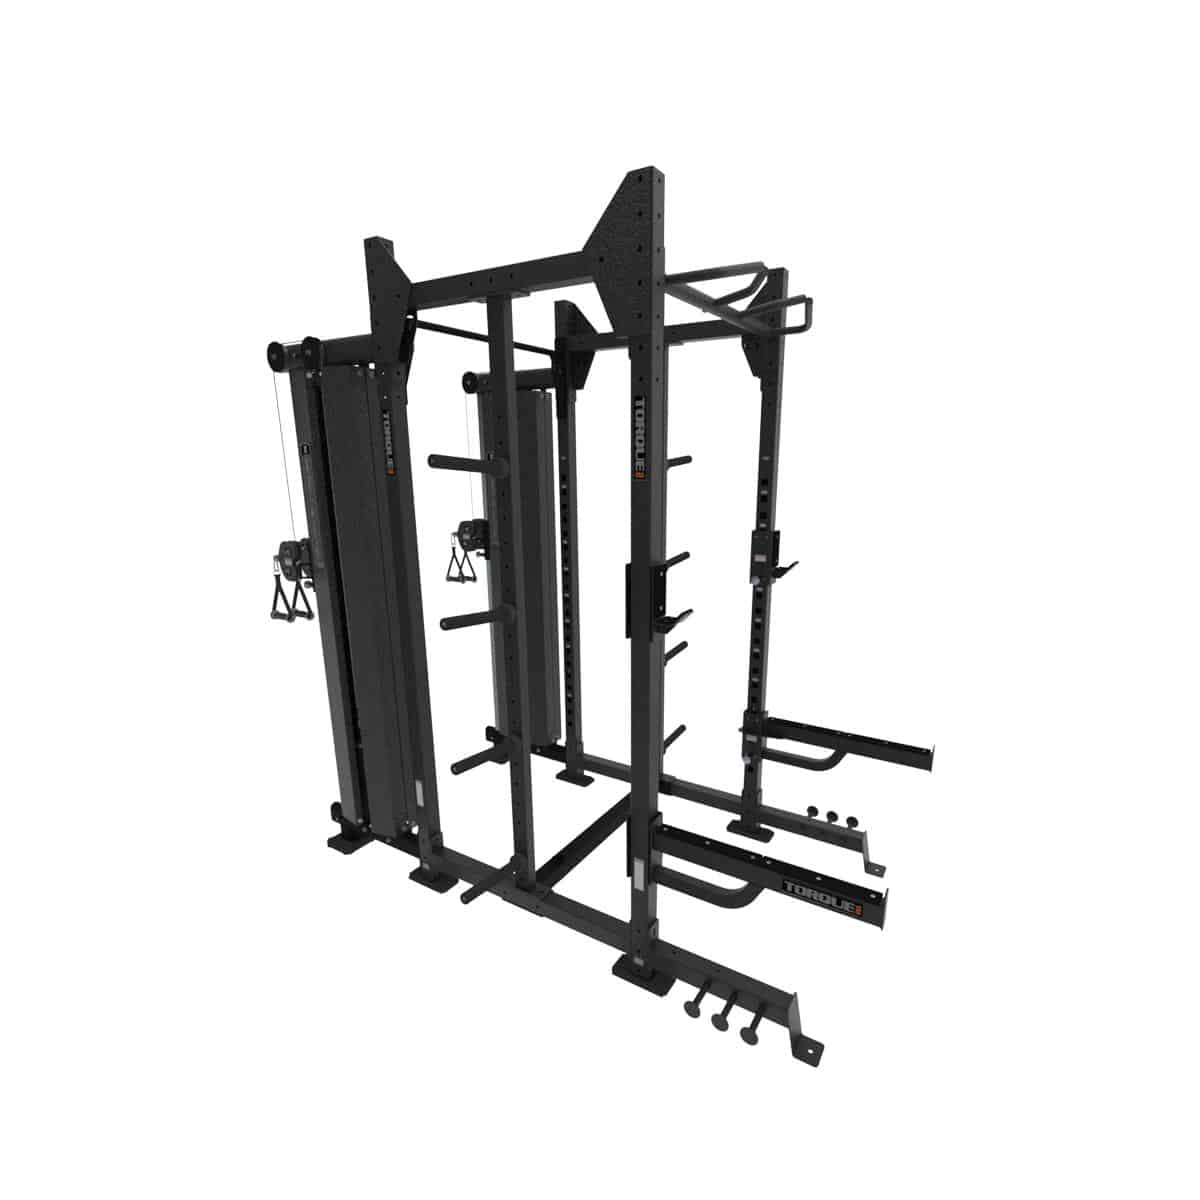 4 X 4 Foot Siege Storage Cable Rack - X1 Package